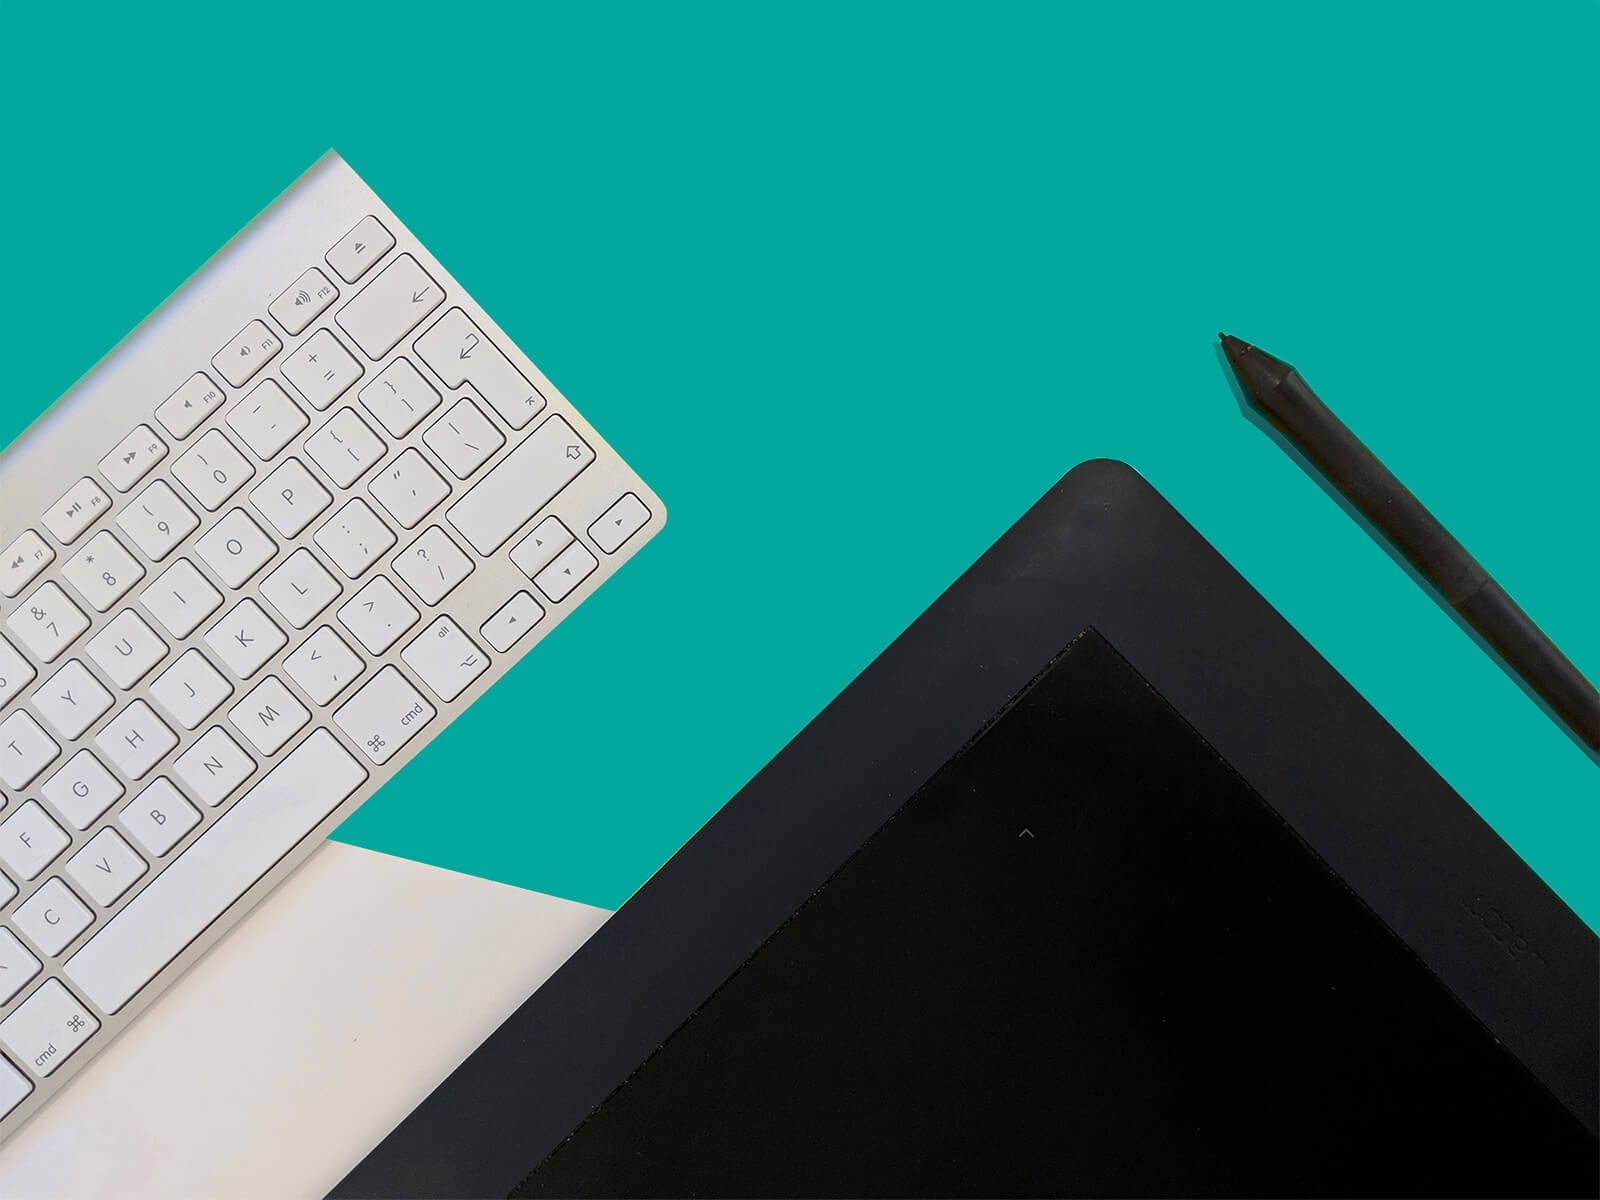 Teal background with keyboard, monitor and touchscreen pen